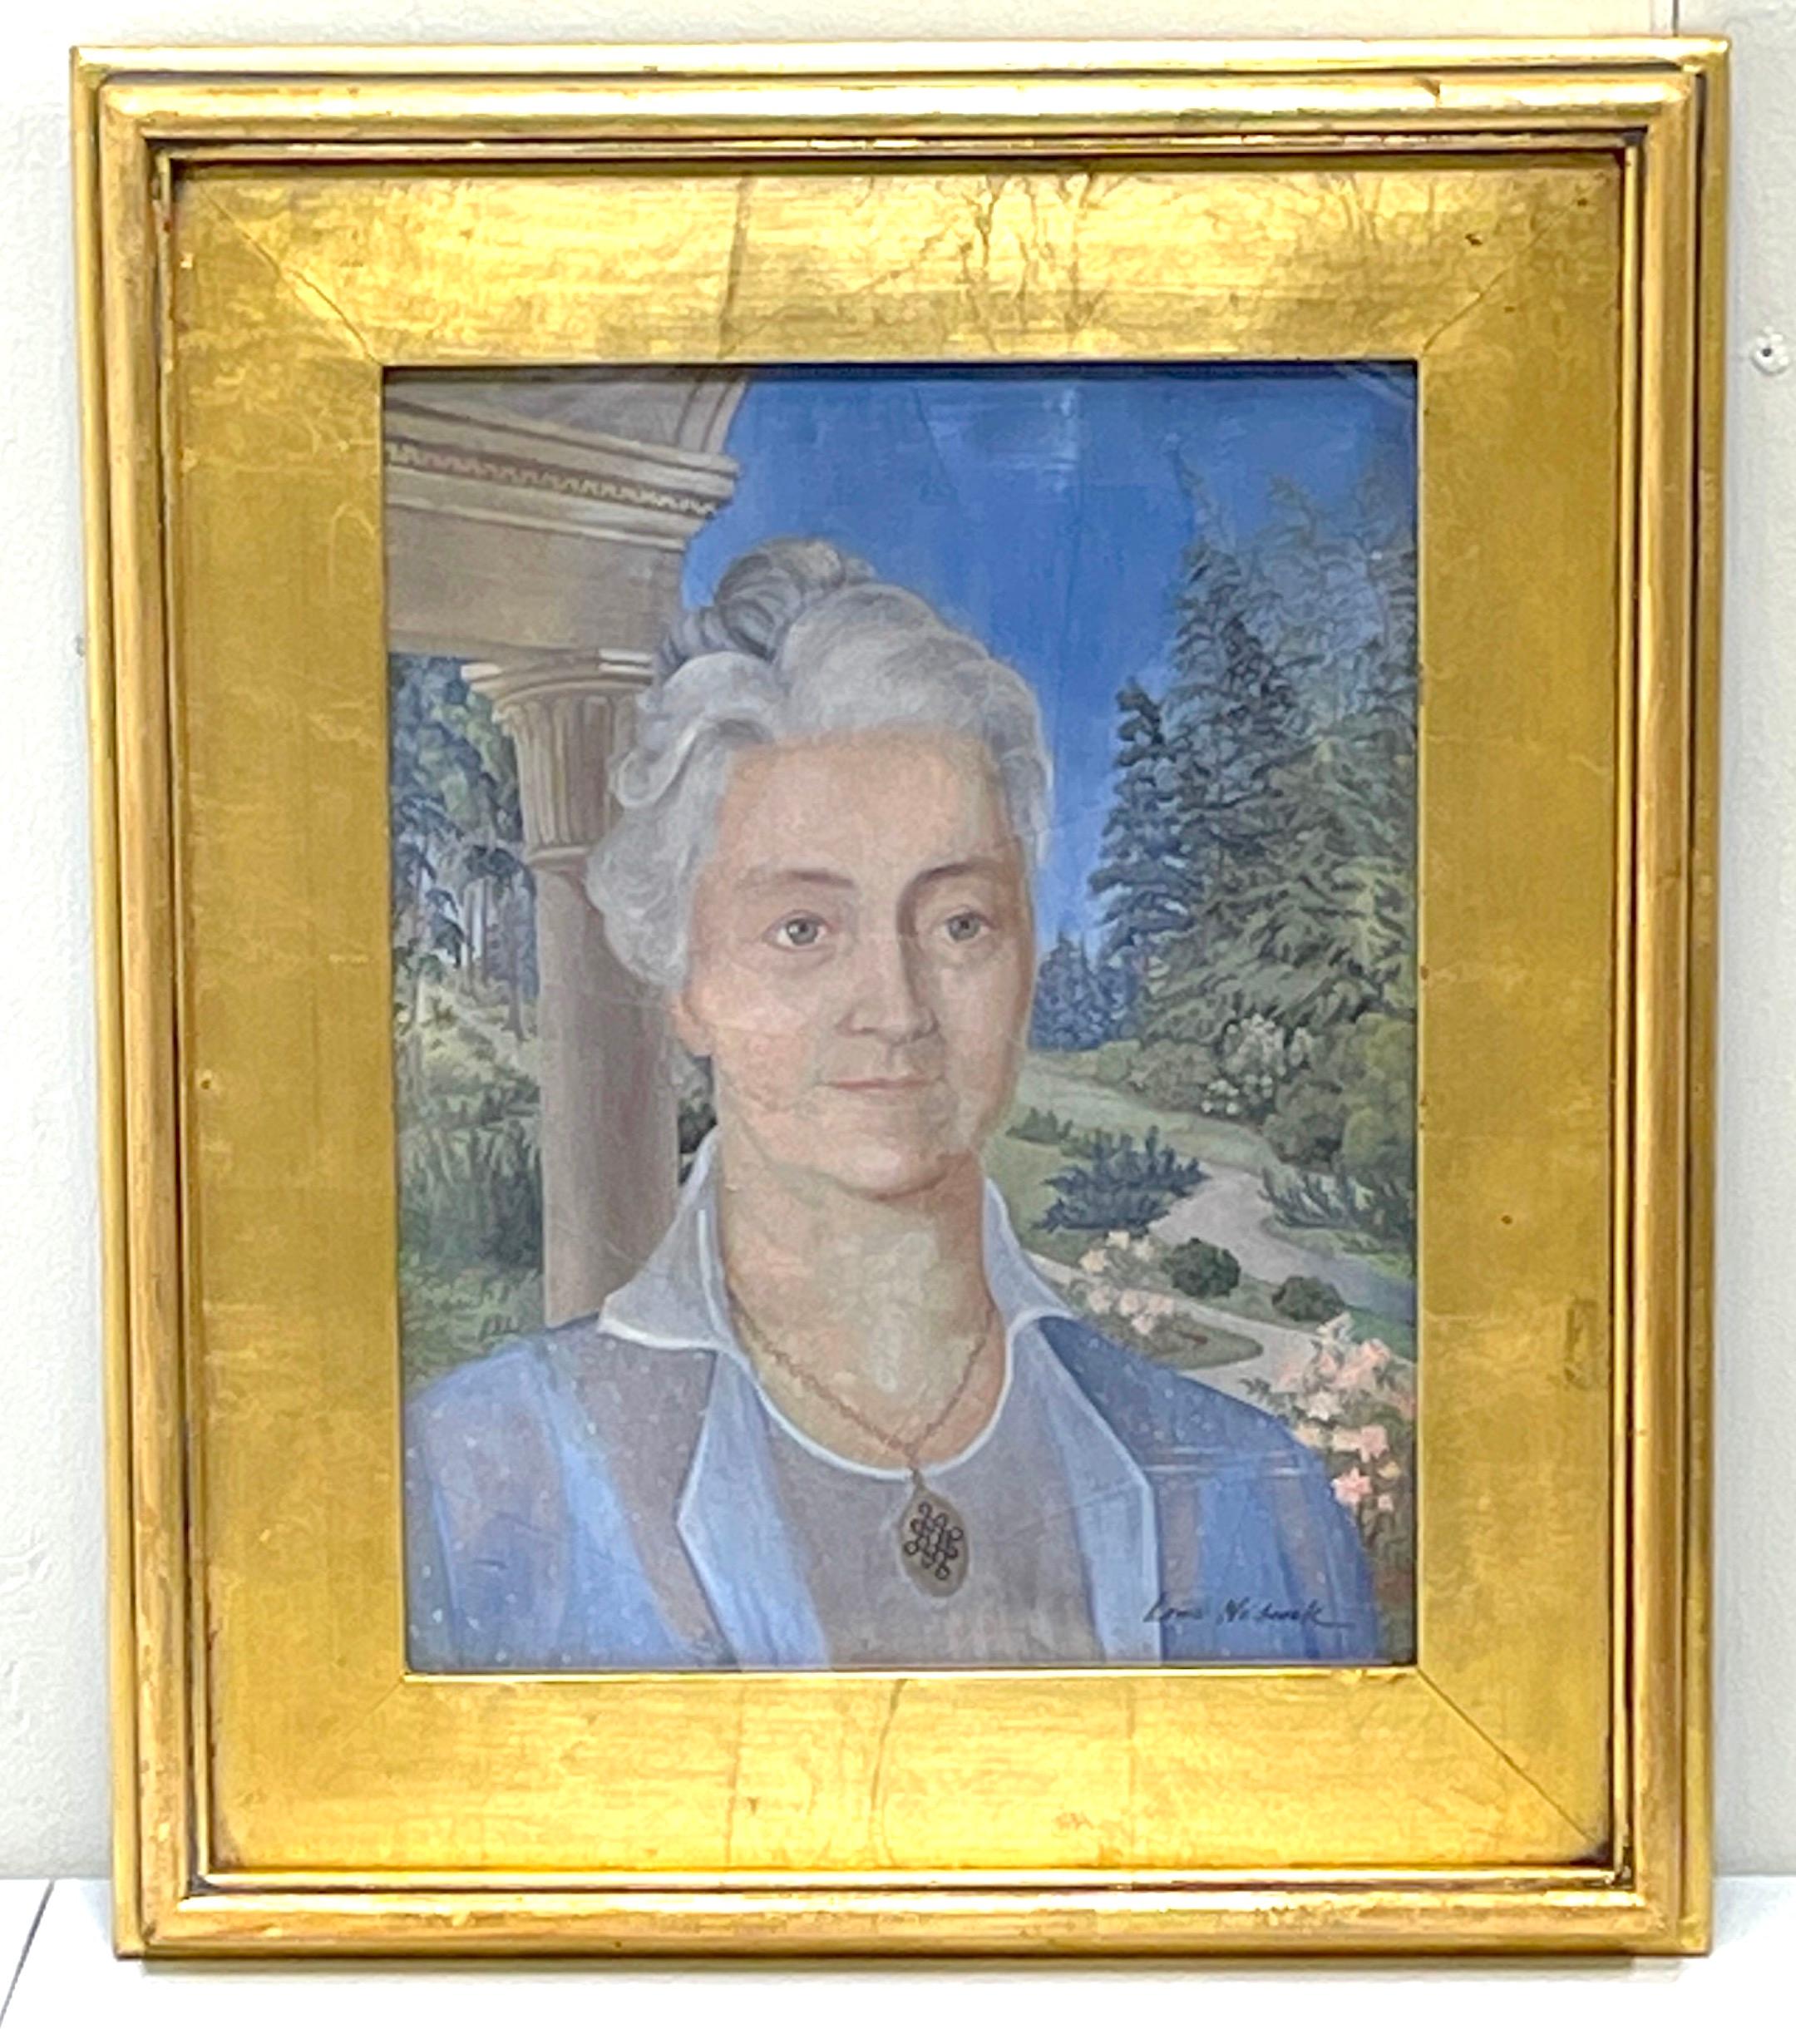 Modern Egg Tempera Portrait of a Lady in Landscape by Louis Wolchonok
Louis Wolchonok American (1898-1973)

A rare example (Egg Tempera) of Louis Wolchonok fine arts techniques, focusing on american Realism. A subtly stunning portrait of a gray